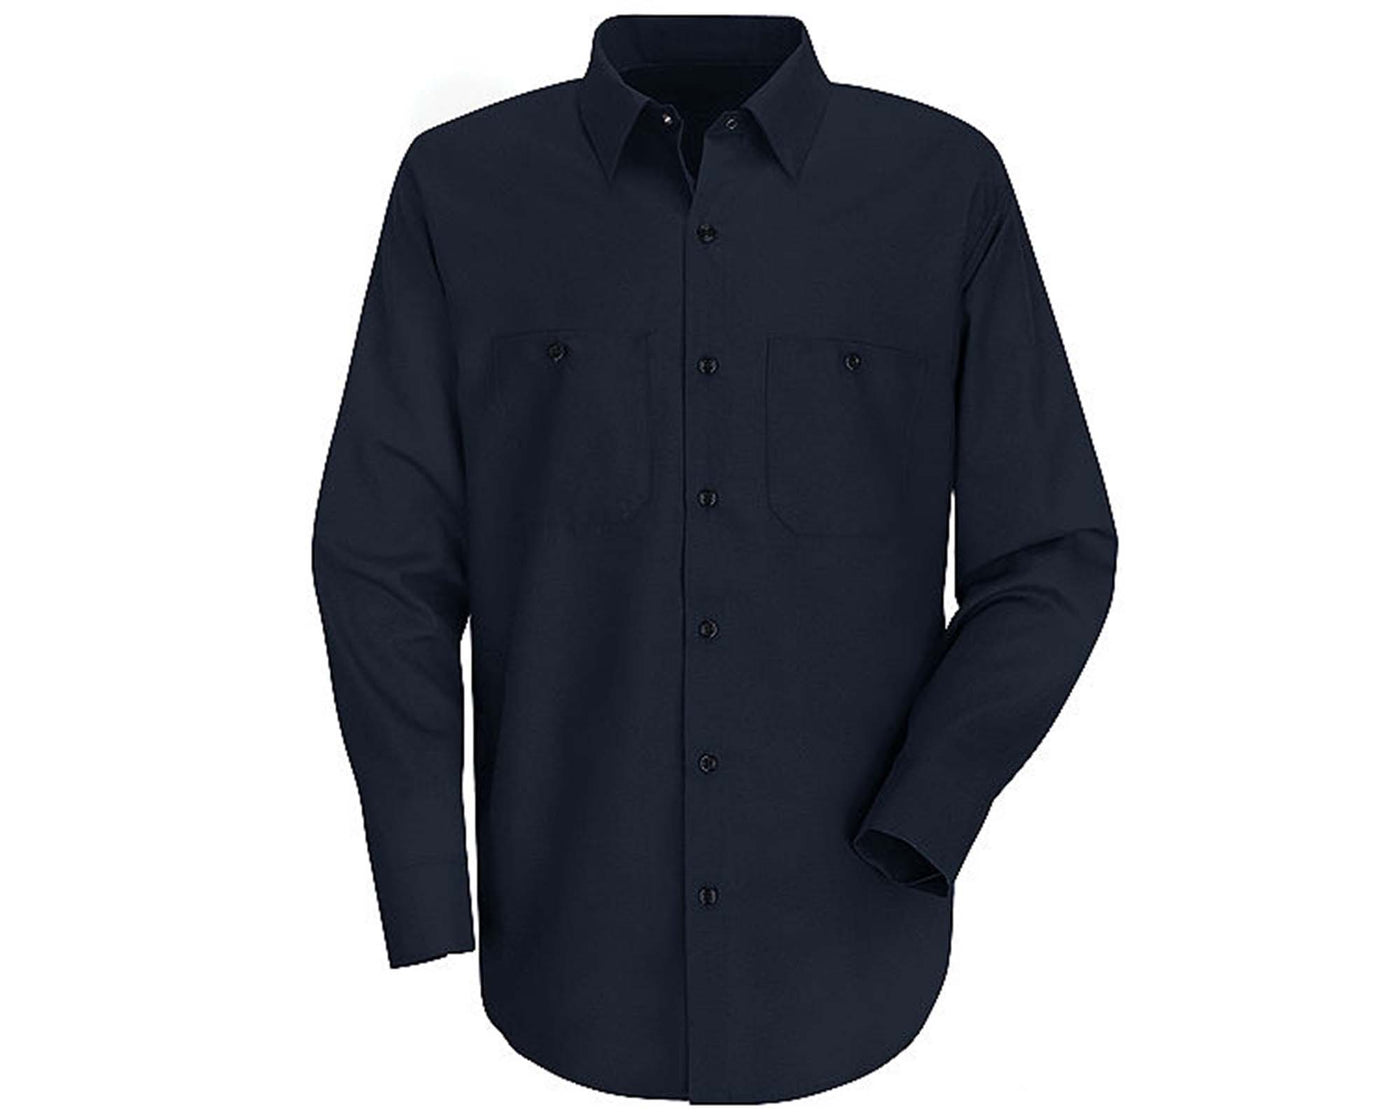 Navy blue industrial long sleeve work shirt with solid button